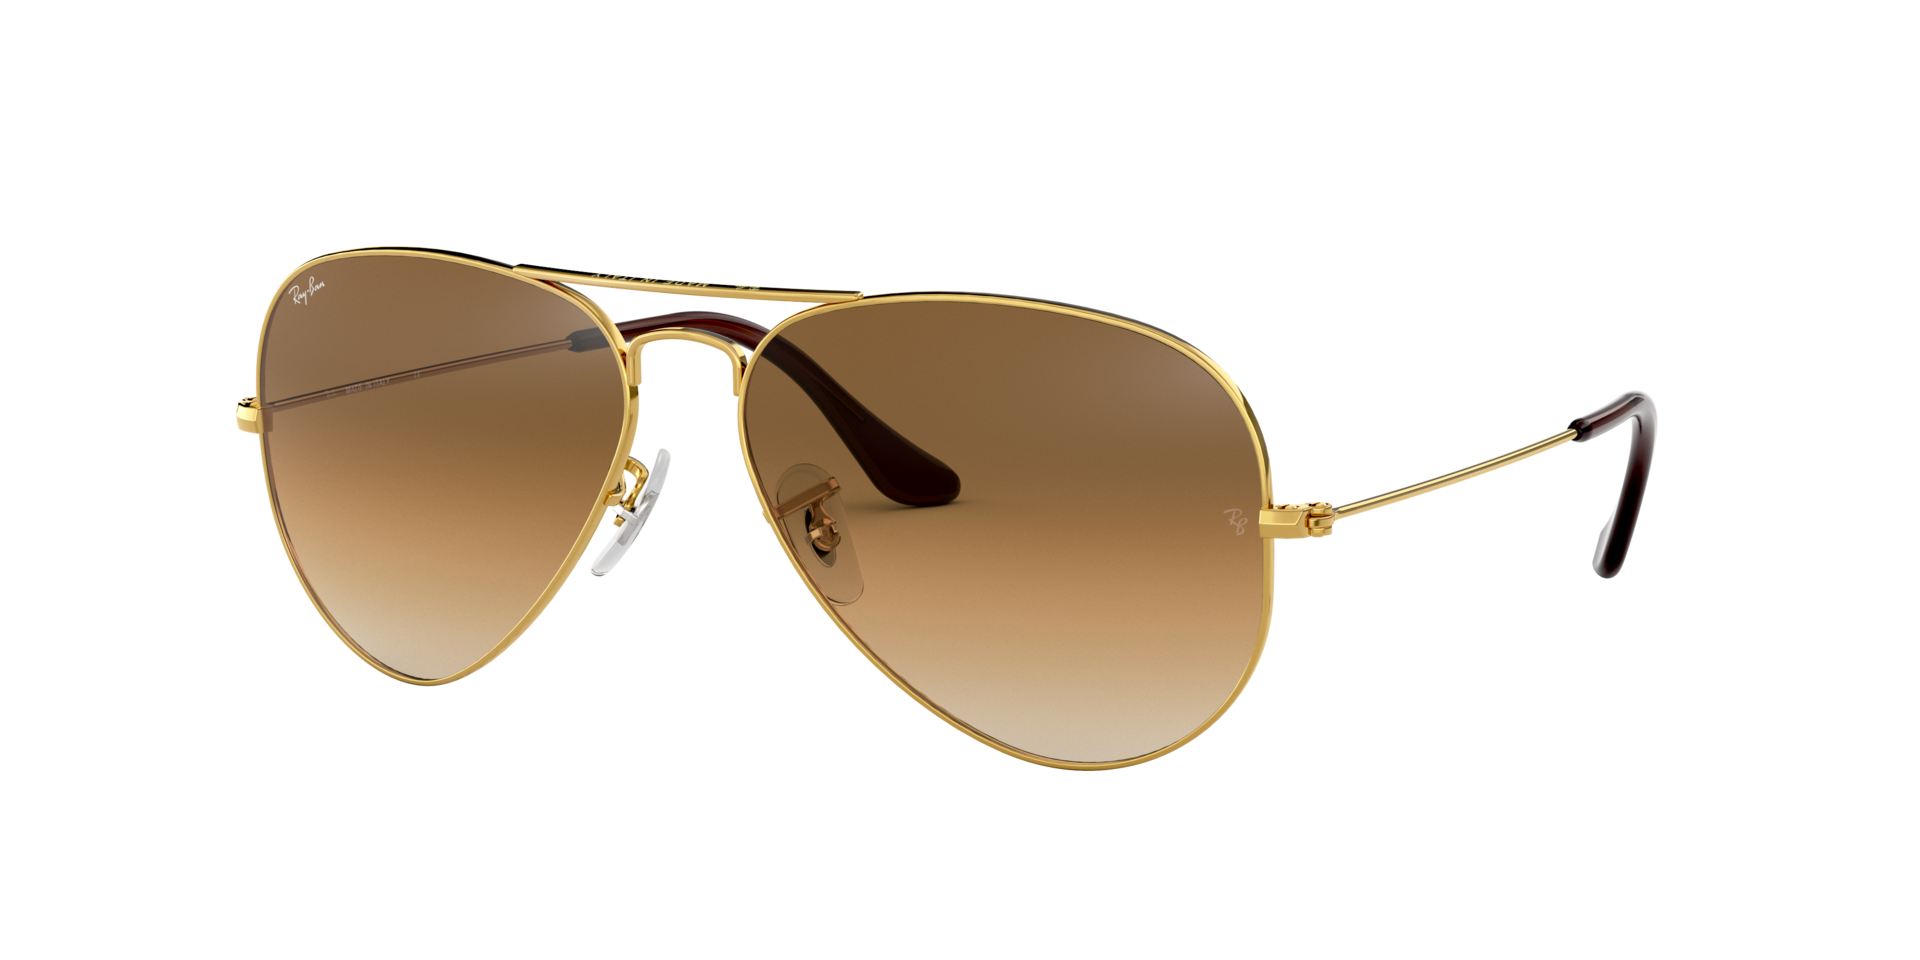 Ray-Ban Aviator Large Metal Sonnenbrille RB3025 001/51 62